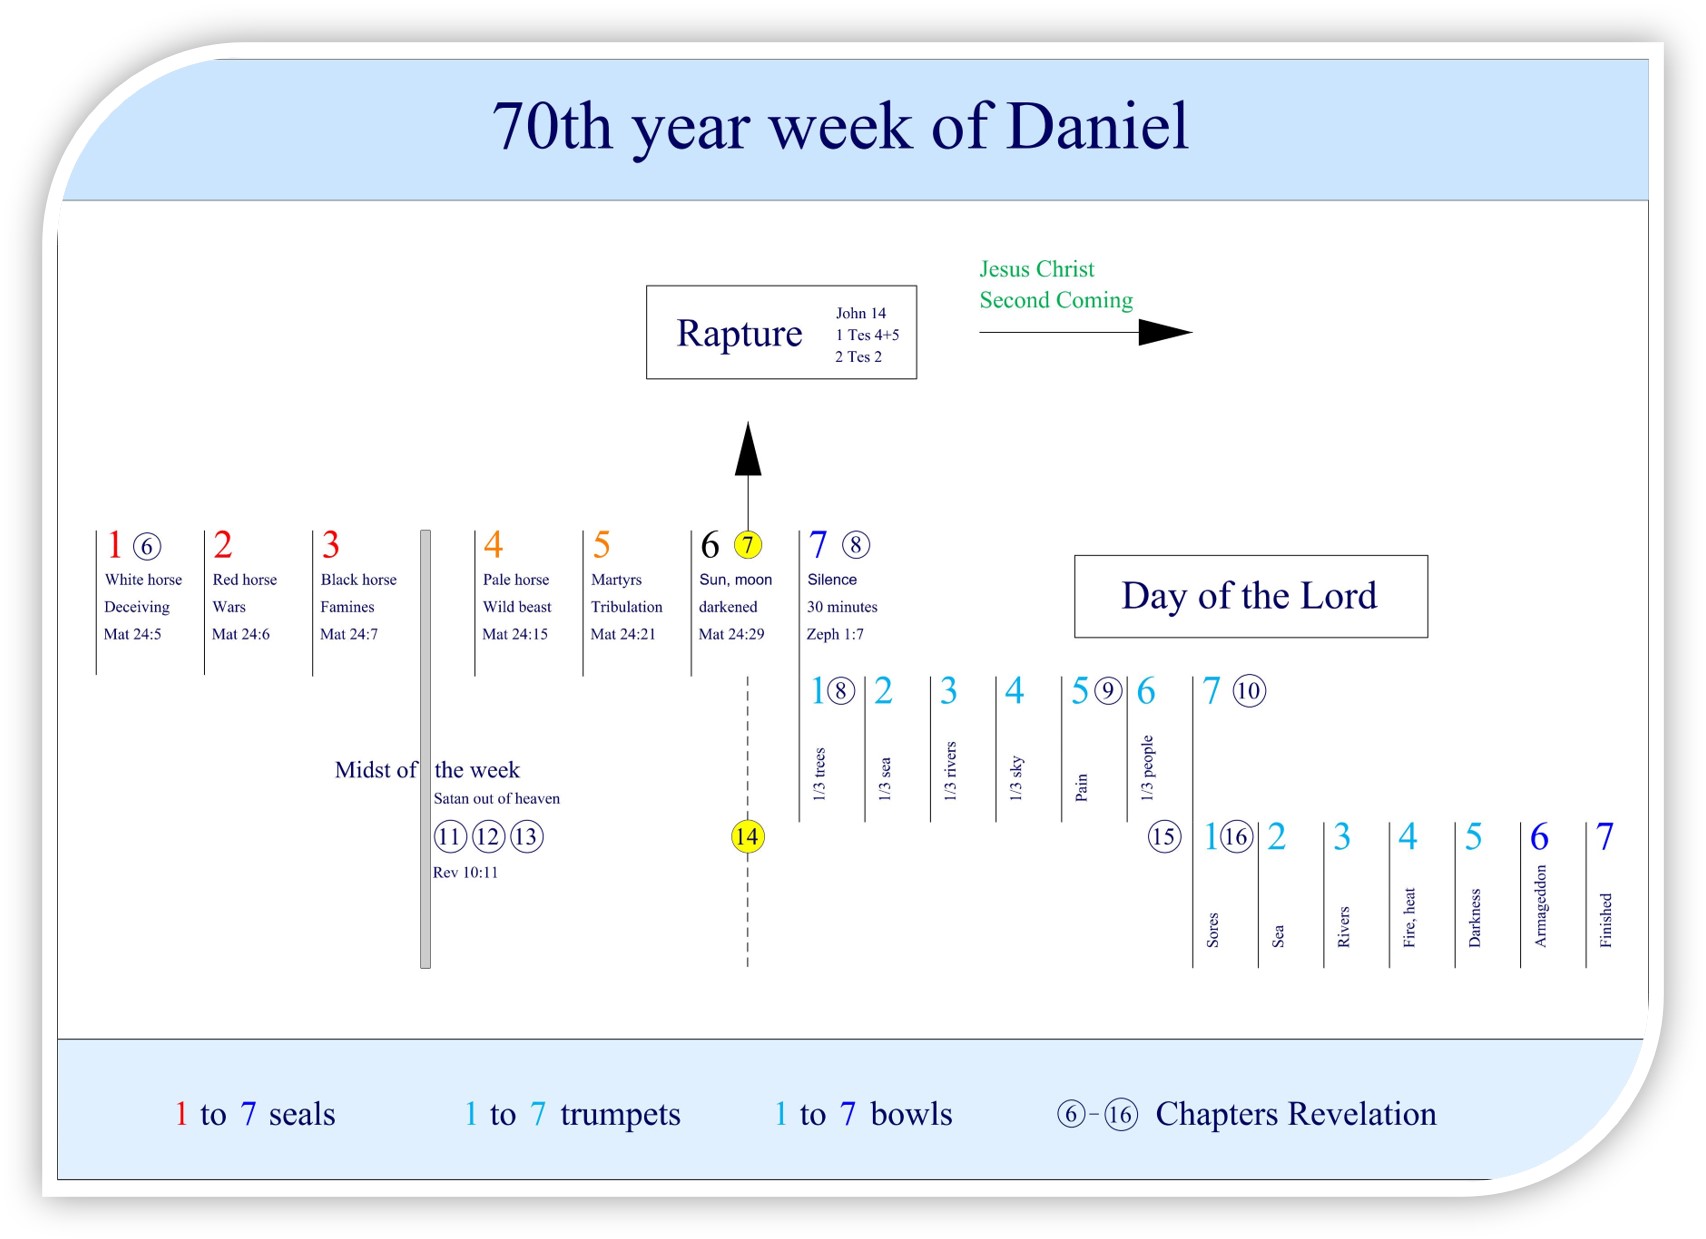 Diagram Second Coming of Jesus Christ according to the Bible book of Revelation